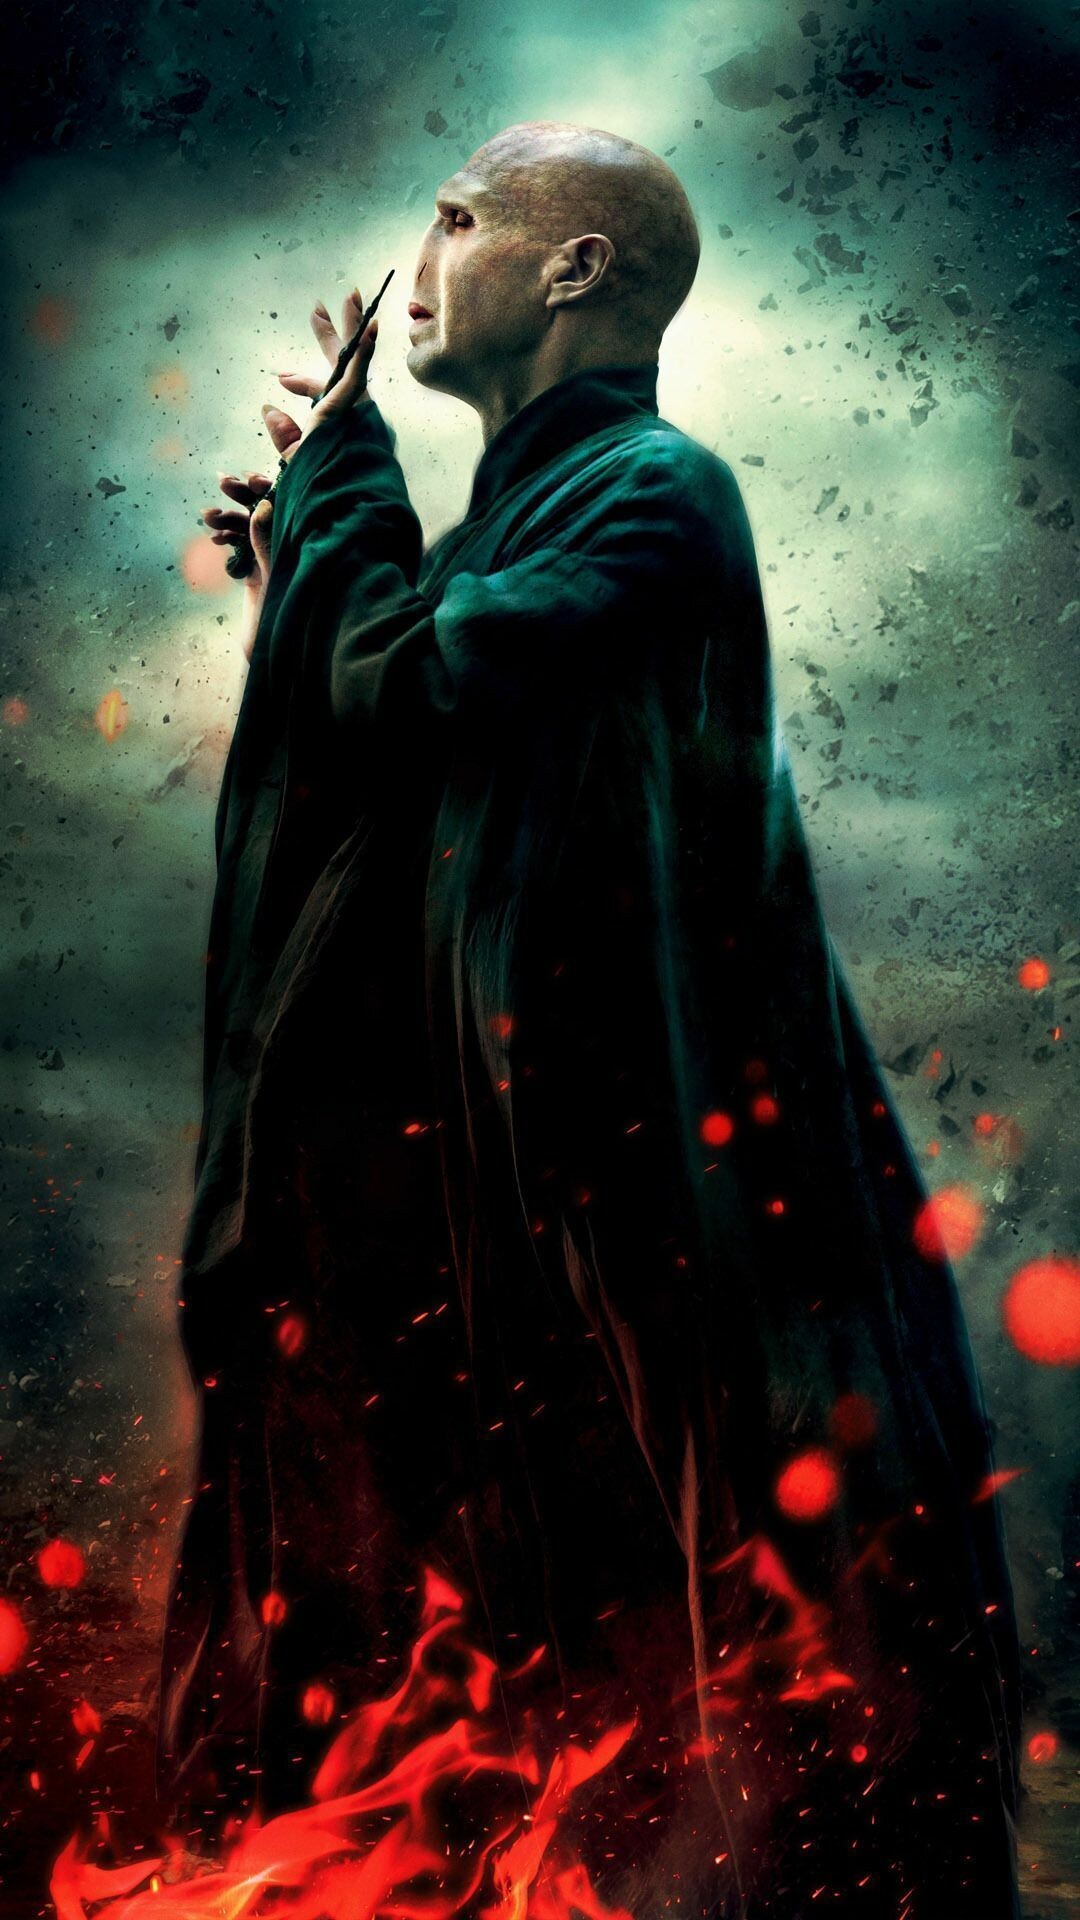 Harry Potter: Lord Voldemort, A sobriquet for Tom Marvolo Riddle, a character and the main antagonist in J. K. Rowling's series. 1080x1920 Full HD Wallpaper.